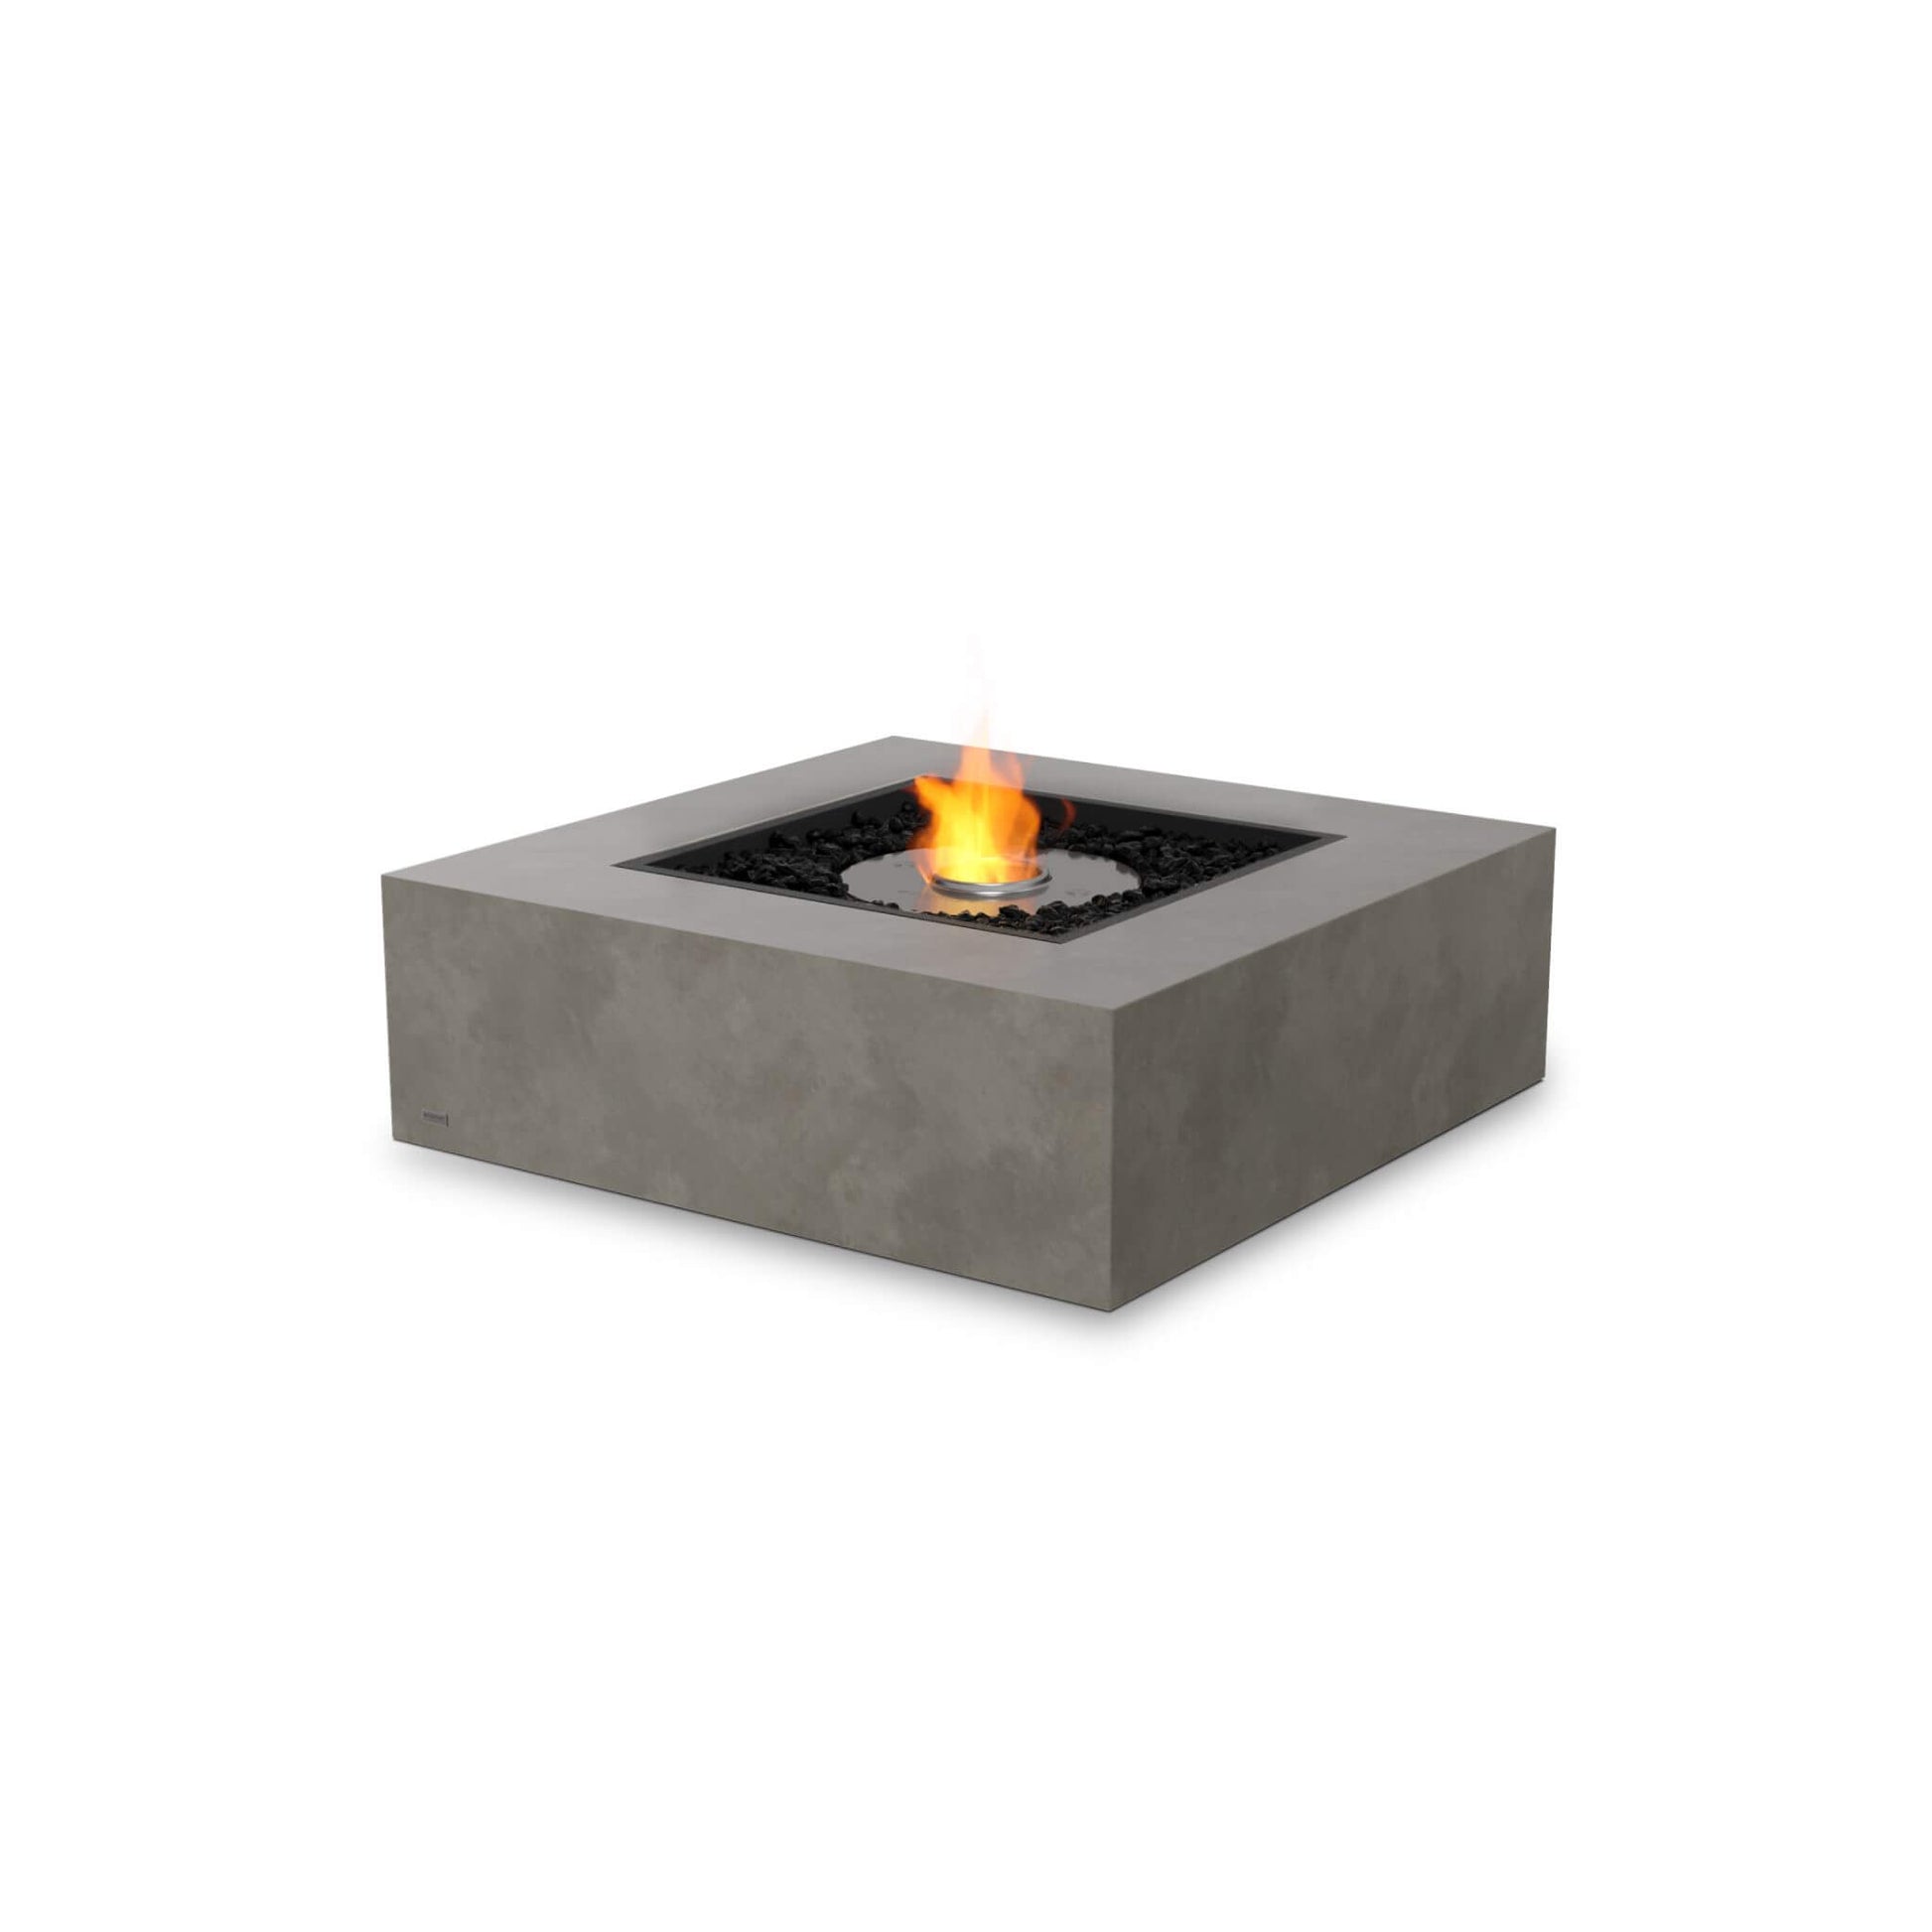 Base 40 Square Concrete Bio Ethanol Fire Pit Coffee Table in Natural (grey) for Indoor & Outdoor Heating by Ecosmart Fire